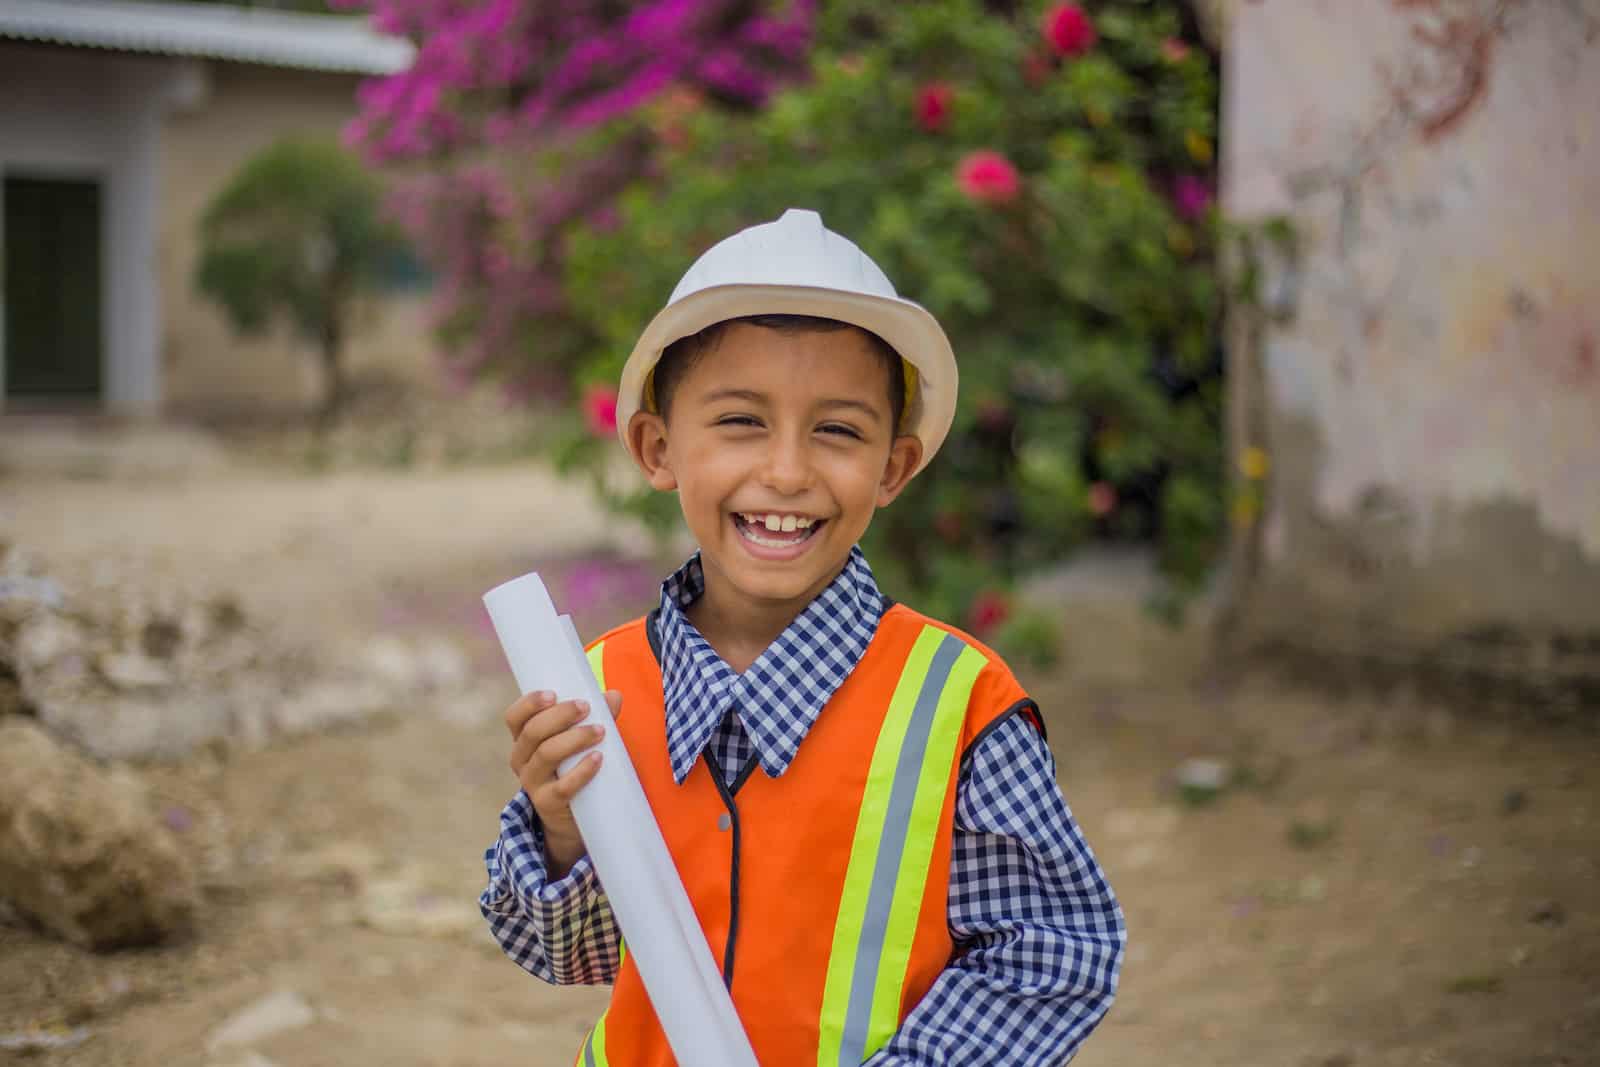 A boy wears a orange safety vest over a blue shirt, along with a hard hat. He holds a rolled up piece of paper, smiling at the camera. He stands on a street in front of a bush with pink flowers. 